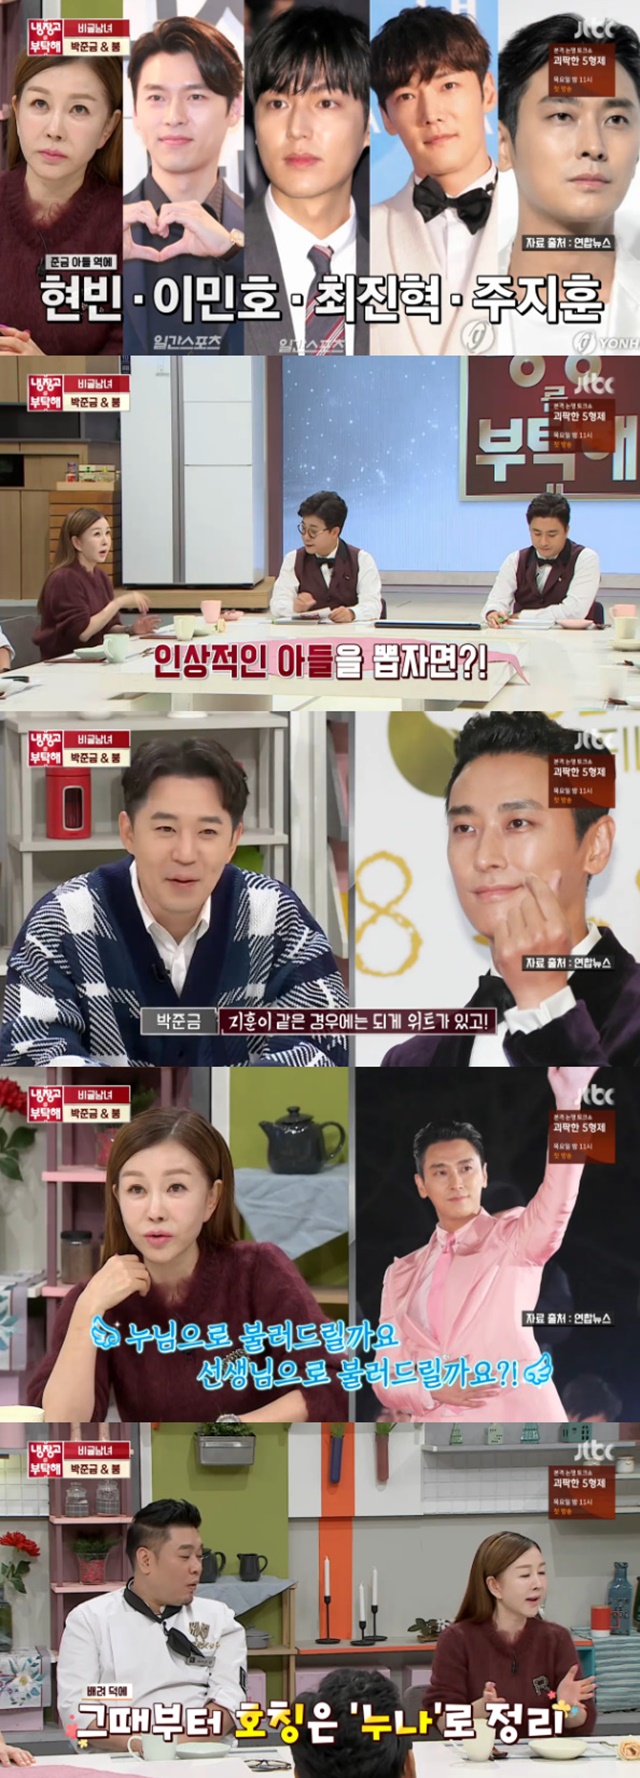 Park Jun-geum praised Lee Min-hos handsomenessActor Park Jun-geum said on JTBCs Take Care of the Refrigerator broadcast on October 28 that Lee Min-ho, who played the role of son, is handsome and memorable.Kim Sung-joo asked, To be a top star, I have to be Park Jun-geum son. Do you remember the son with many people?Park Jun-geum replied, Son like Lee Min-ho is handsome even if you look close and handsome from a distance.han jung-won